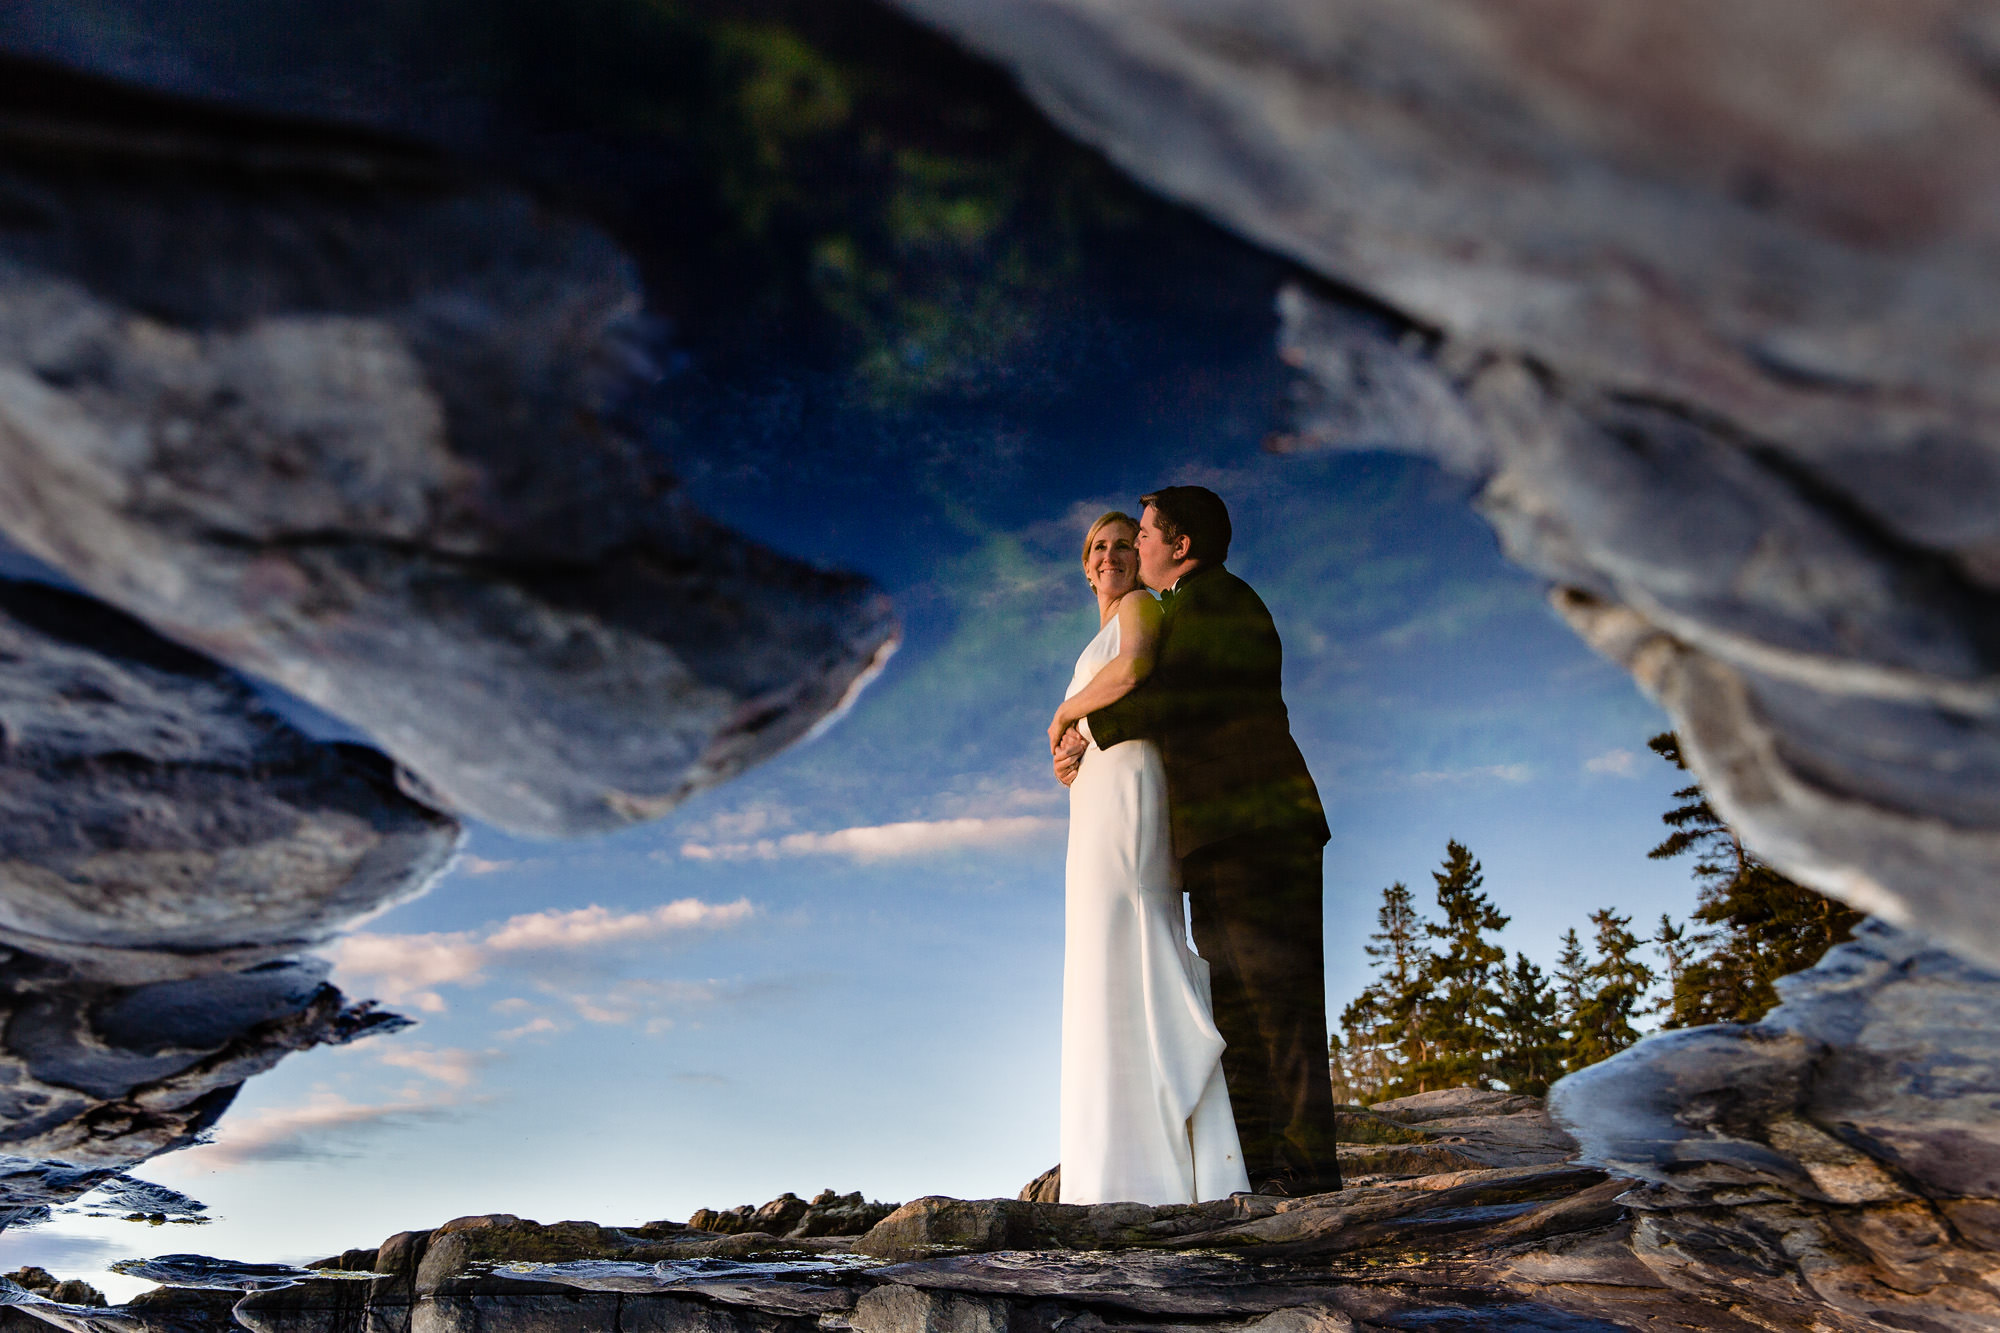 The bride and groom take couples portraits at sunset at the Newagen Inn